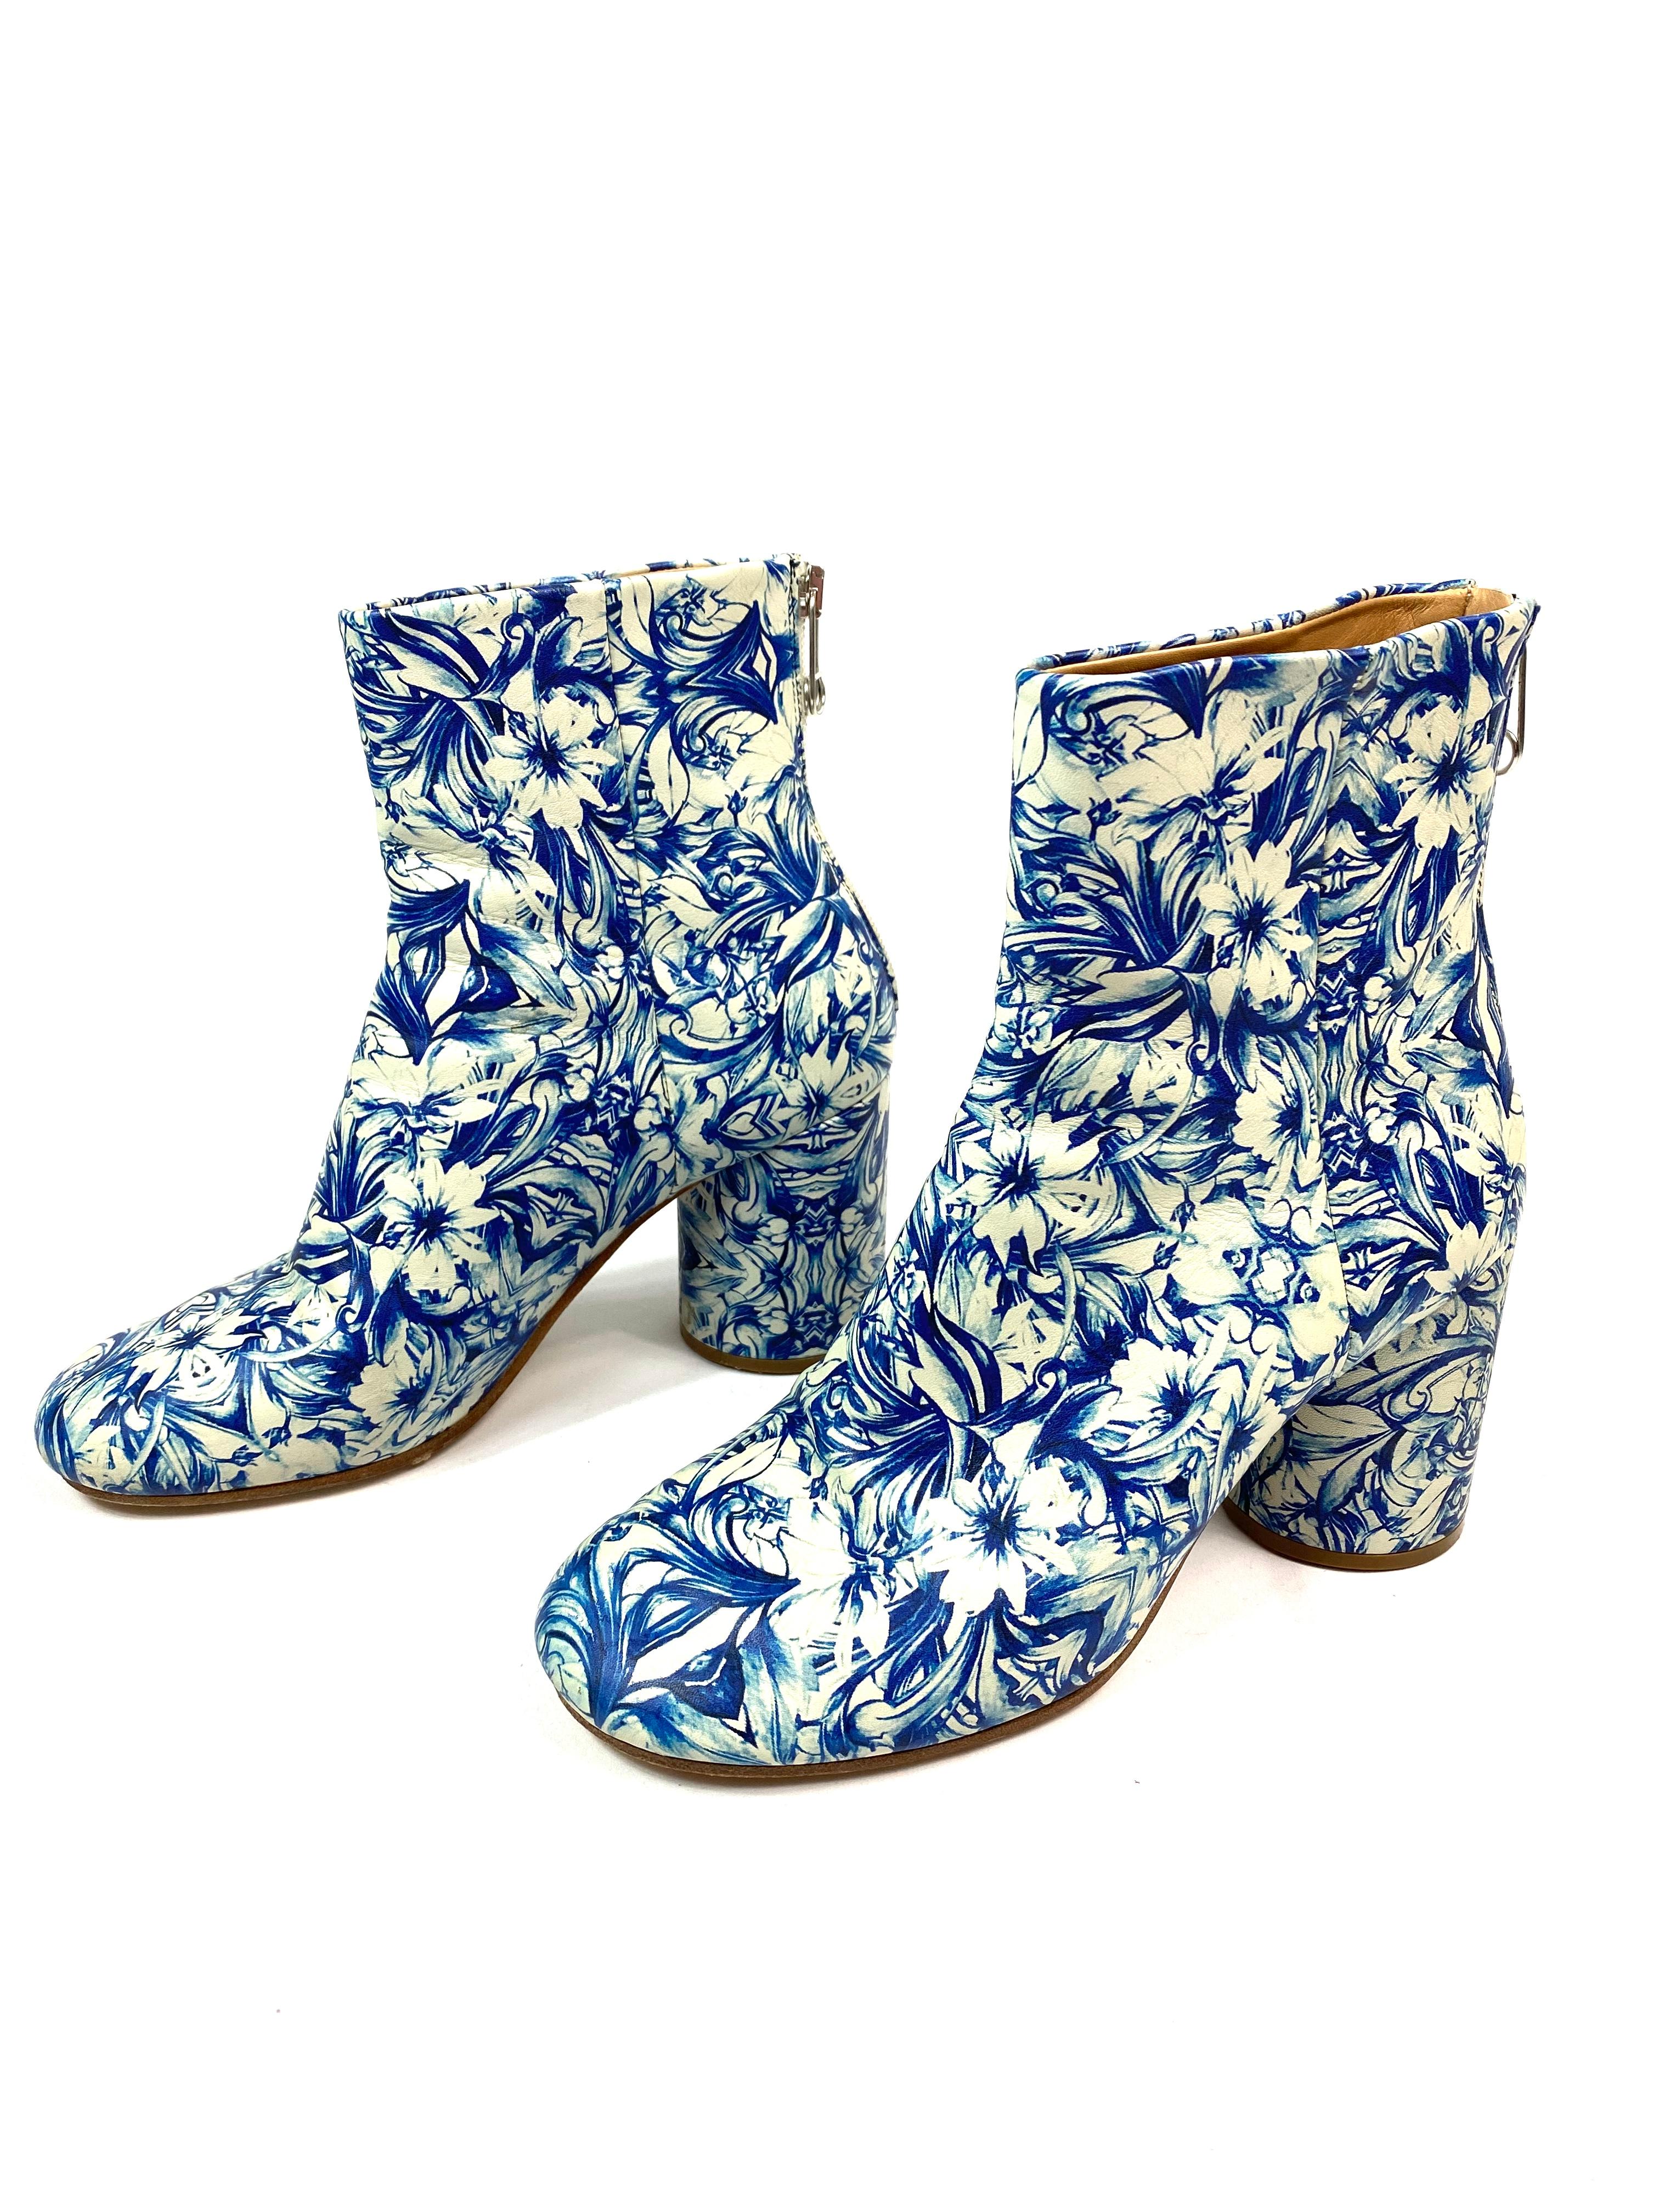 MAISON MARGIELA White and Blue Floral Print Leather Block Heel Booties SIZE 38.5

Product details:
The boots come with the original box
Rounded toe
Silver tone hardware rear zip closure 
The heel height is 3.25